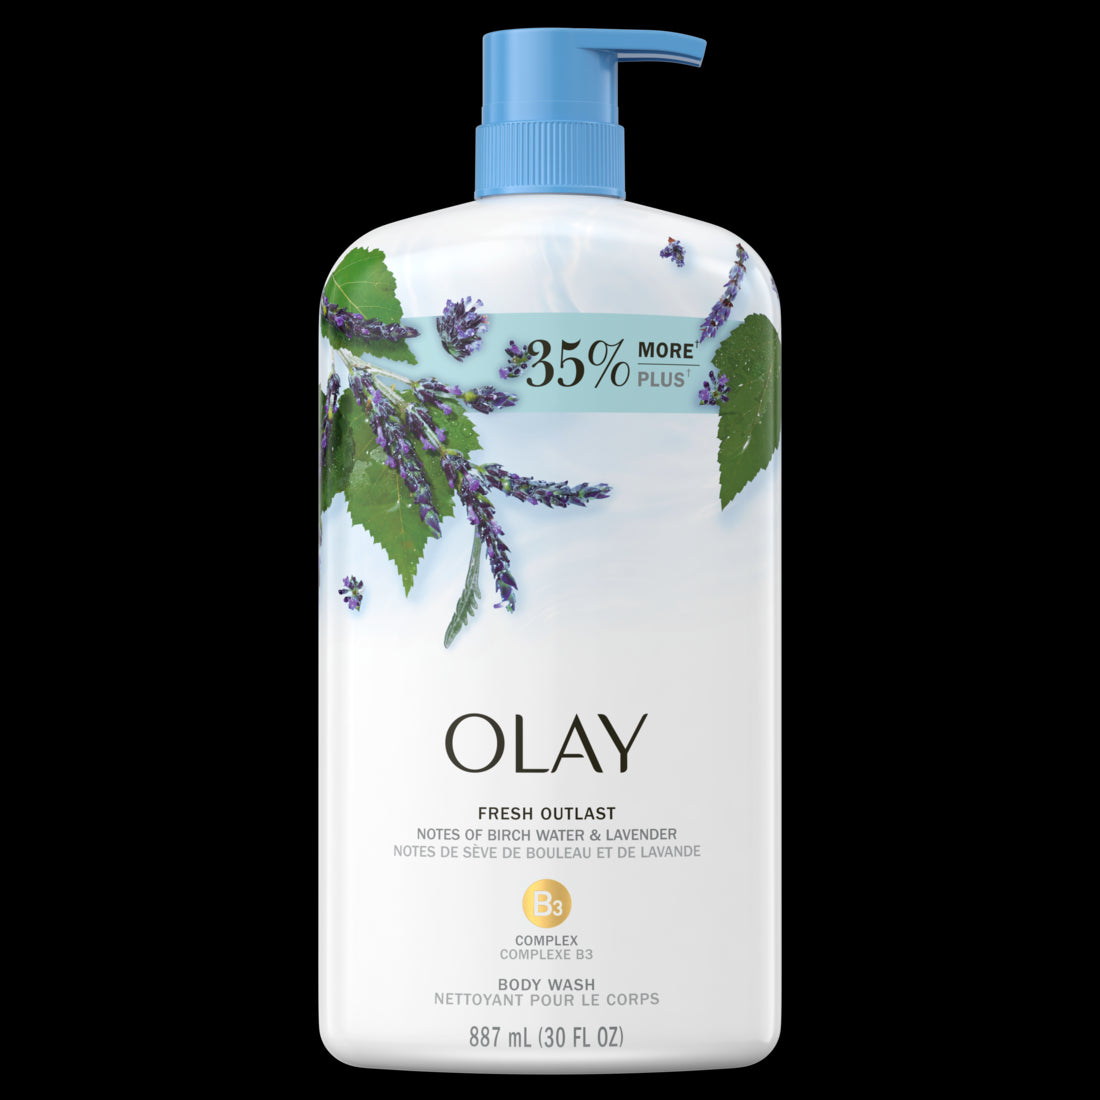 Olay Fresh Outlast Body Wash Notes Of Birch Water & Lavender - 30oz/4pk